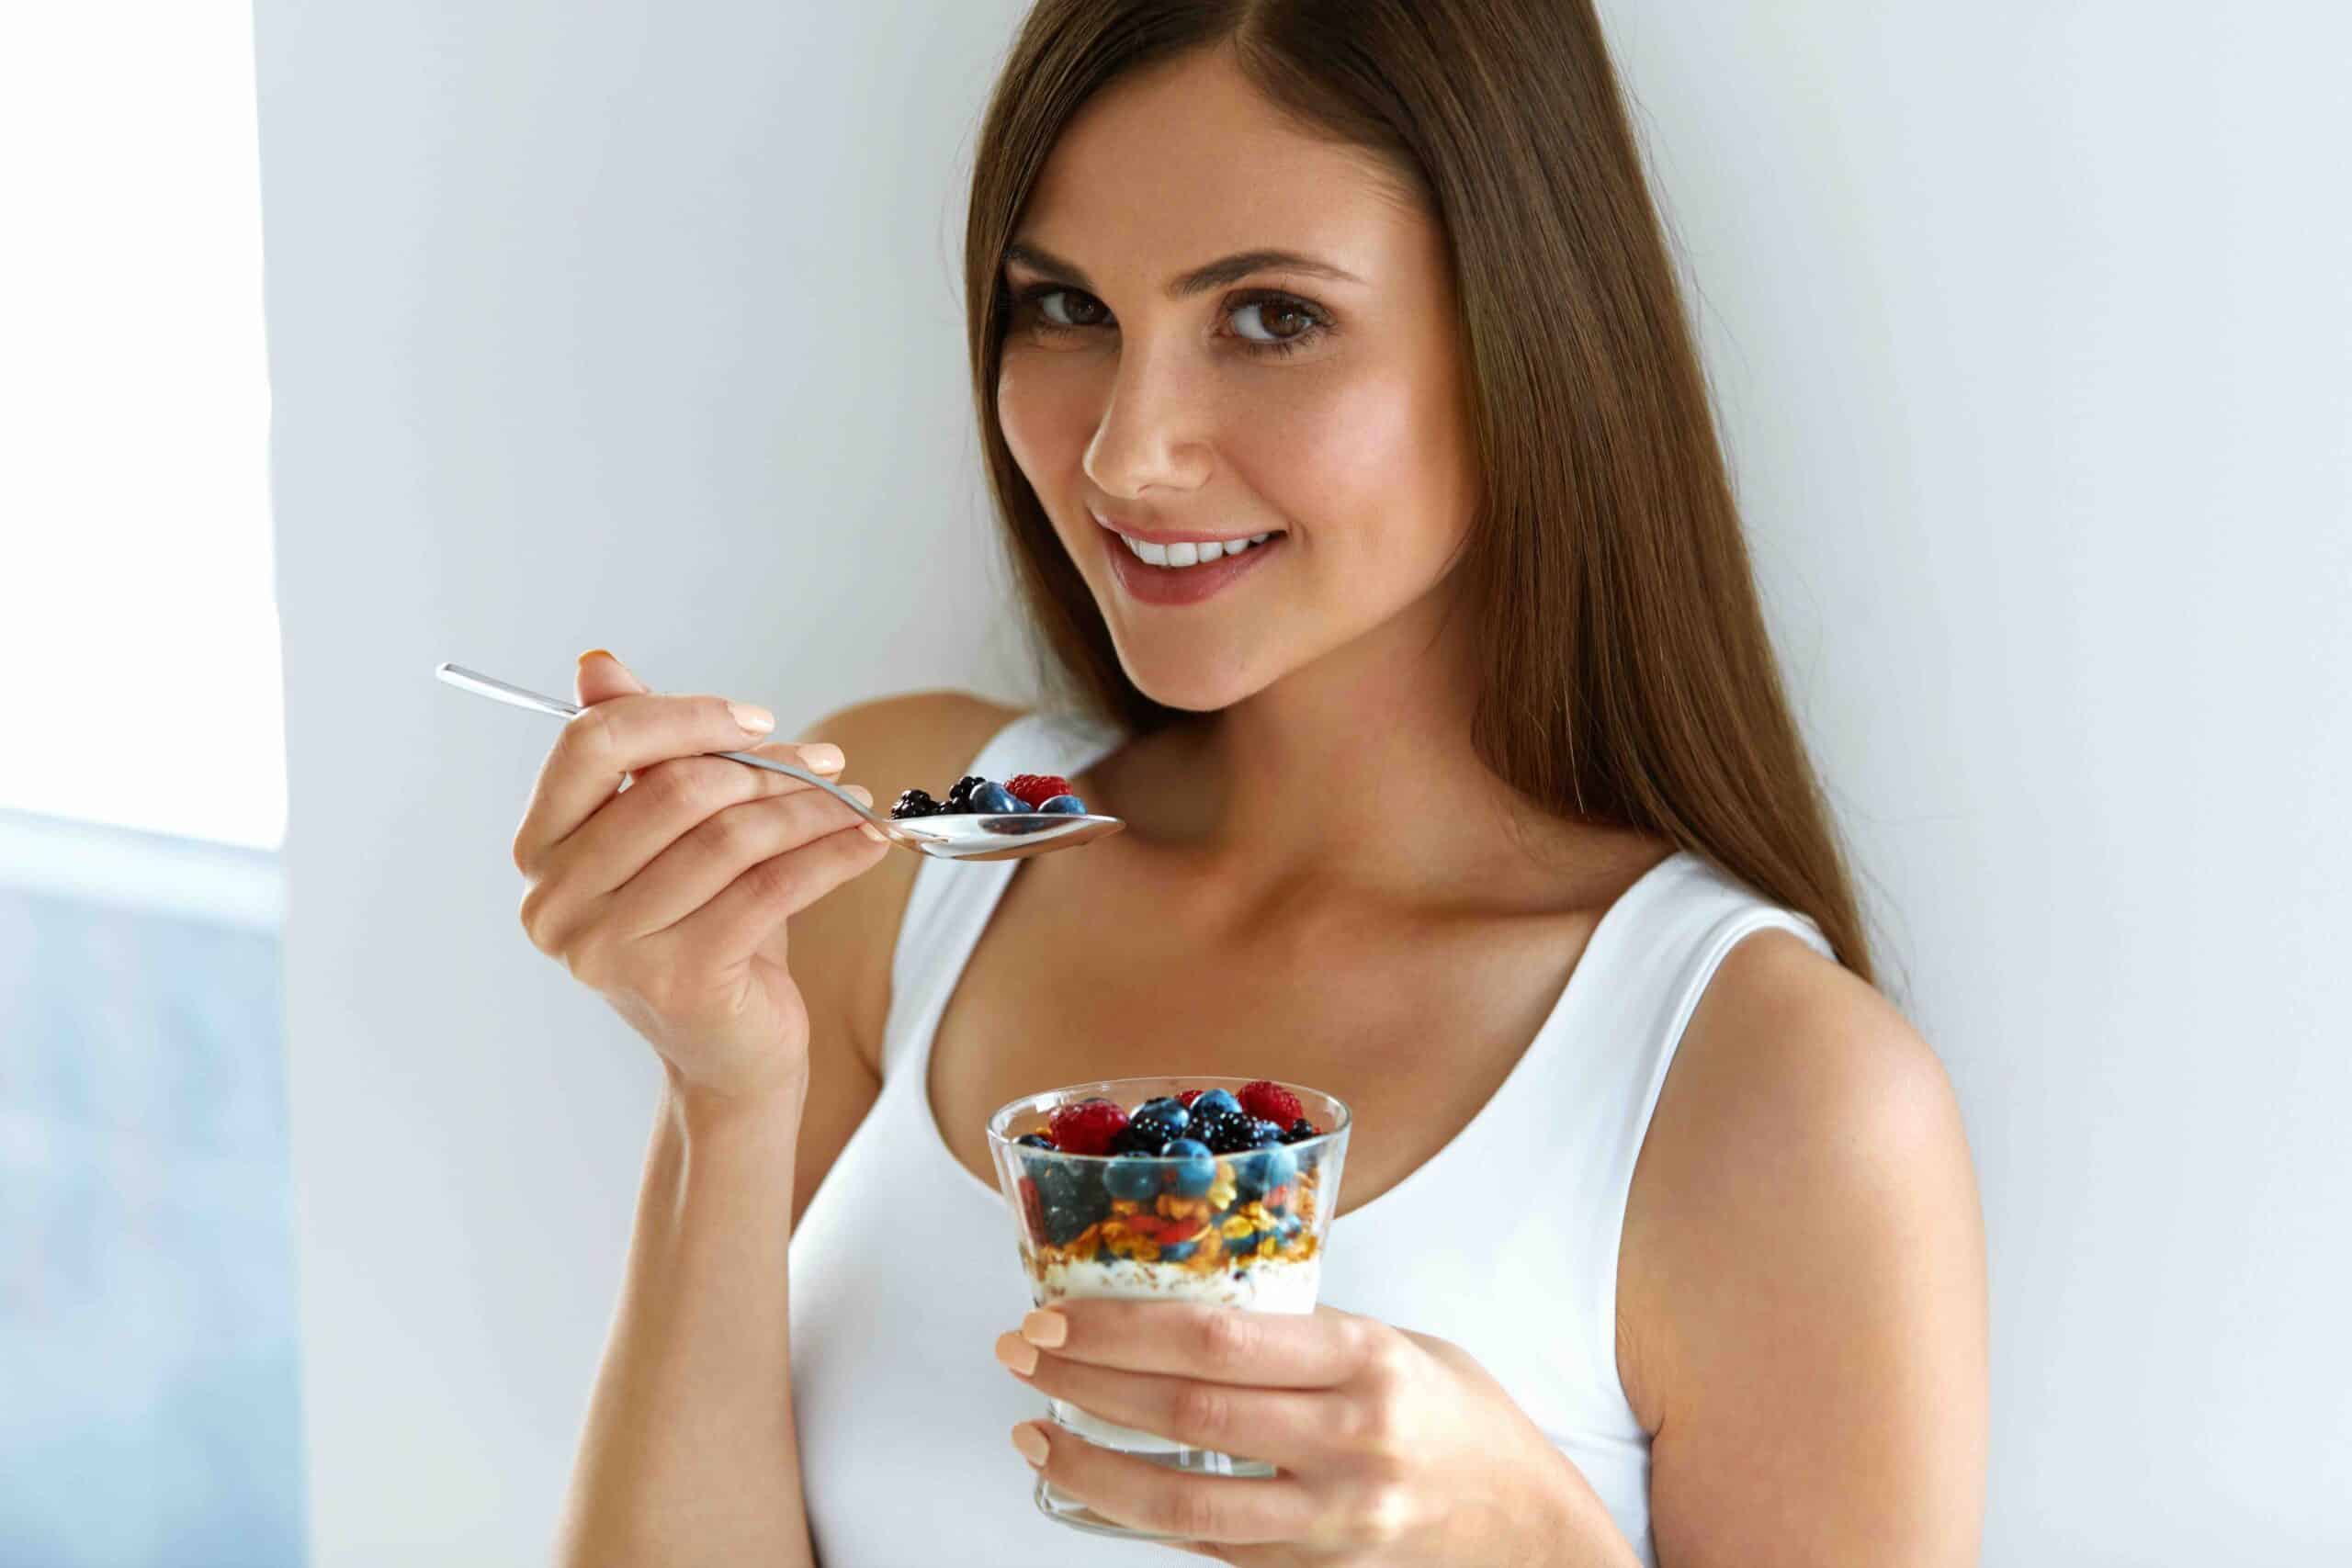 Healthy Weight Loss Food. Portrait Of Pretty Smiling Fit Girl Having Yogurt, Berries And Oatmeal. Beautiful Young Woman Eating Fresh Yoghurt, Berries And Granola For Breakfast. Diet Nutrition Concept